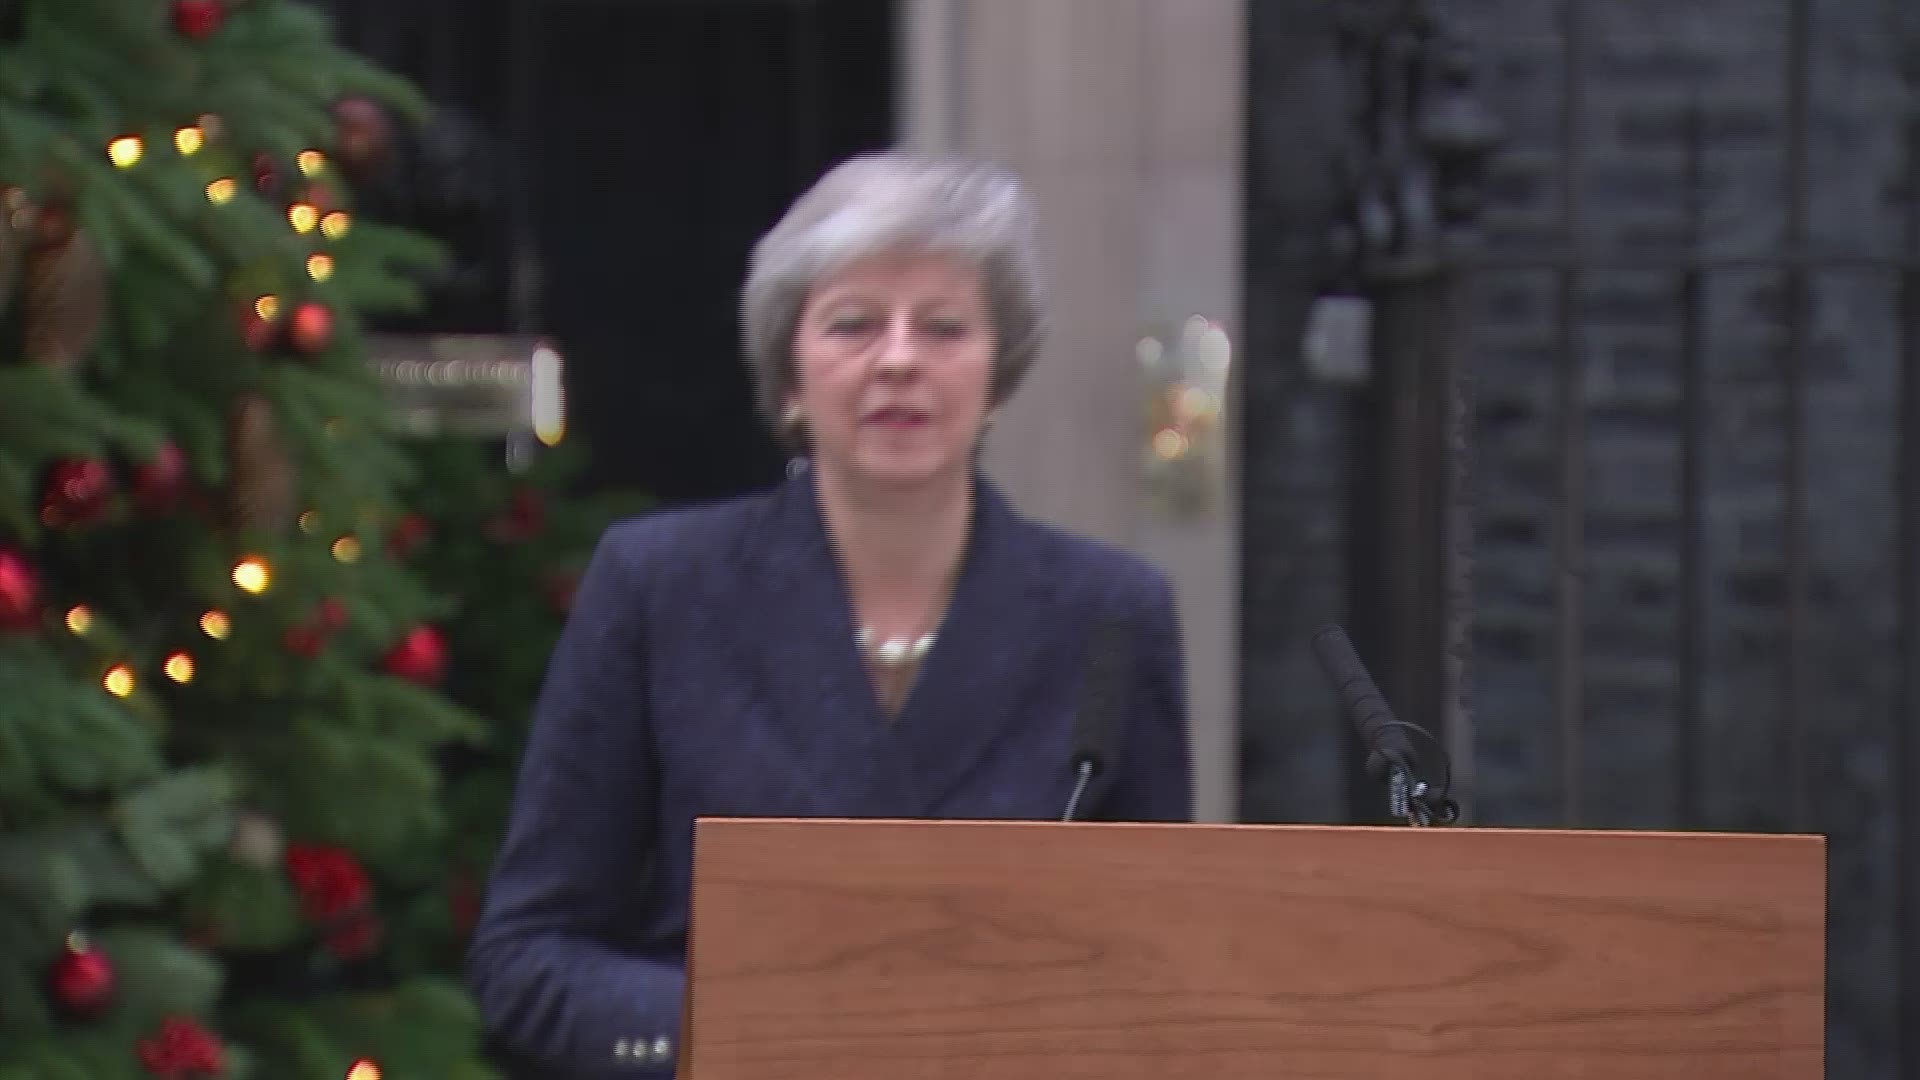 British Prime Minister Theresa May on Wednesday vowed to fight a no-confidence vote "with everything I've got", appealing to party colleagues to support her leadership. (AP)